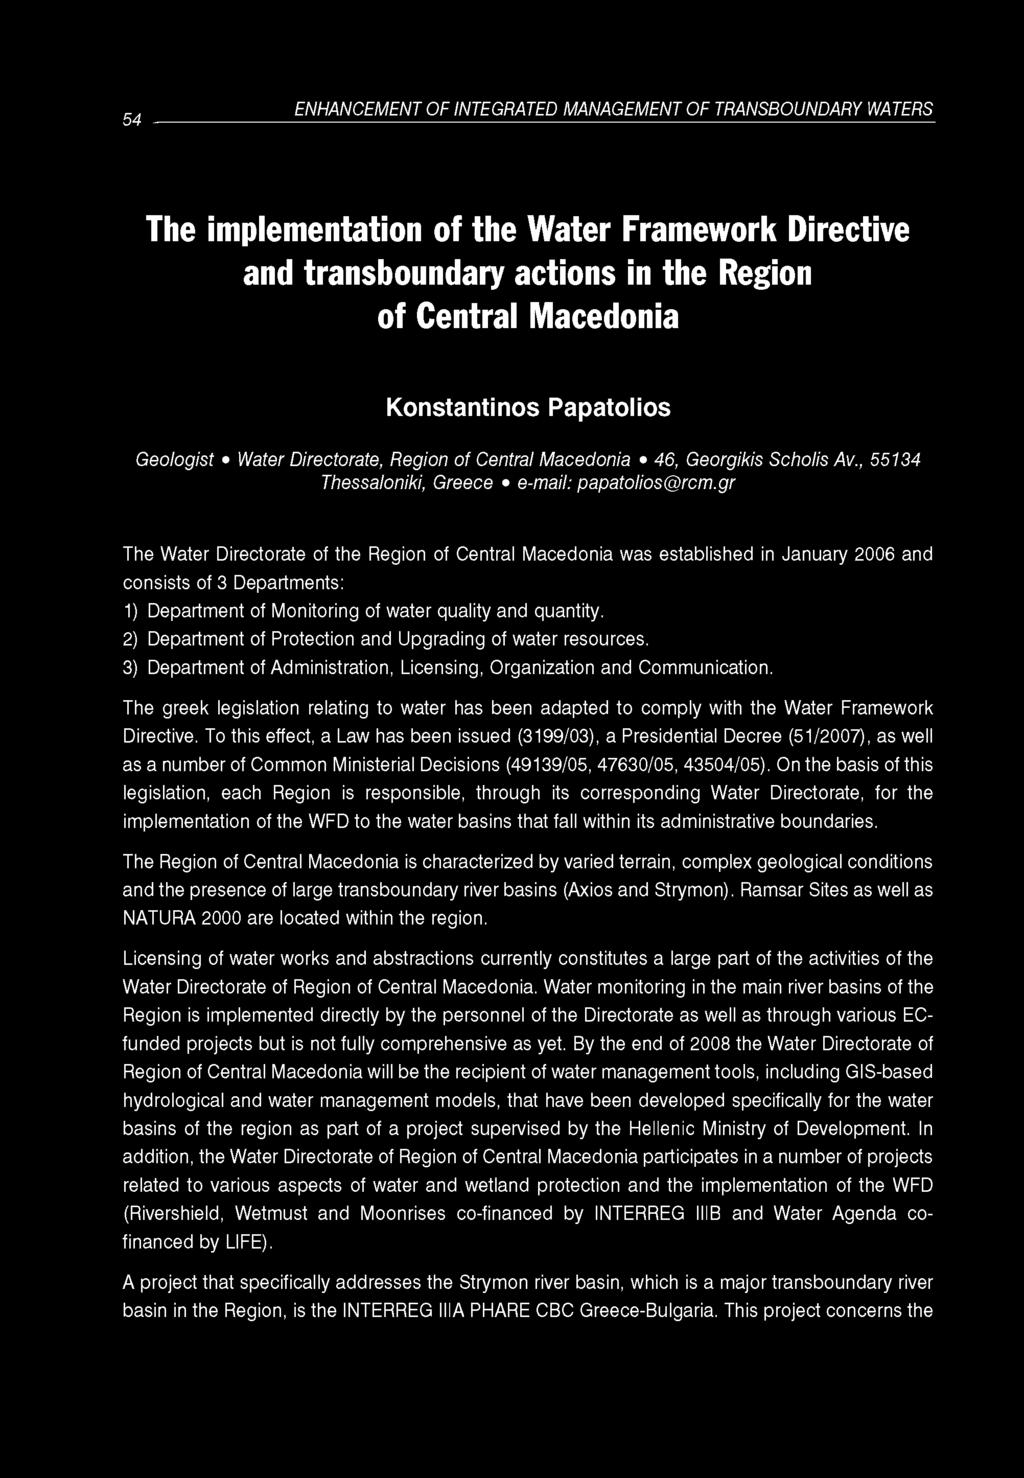 54 ENHANCEMENT OF INTEGRATED MANAGEMENT OF TRANSBOUNDARY WATERS The implementation of the Water Framework Directive and transboundary actions in the Region of Central Macedonia Konstantinos